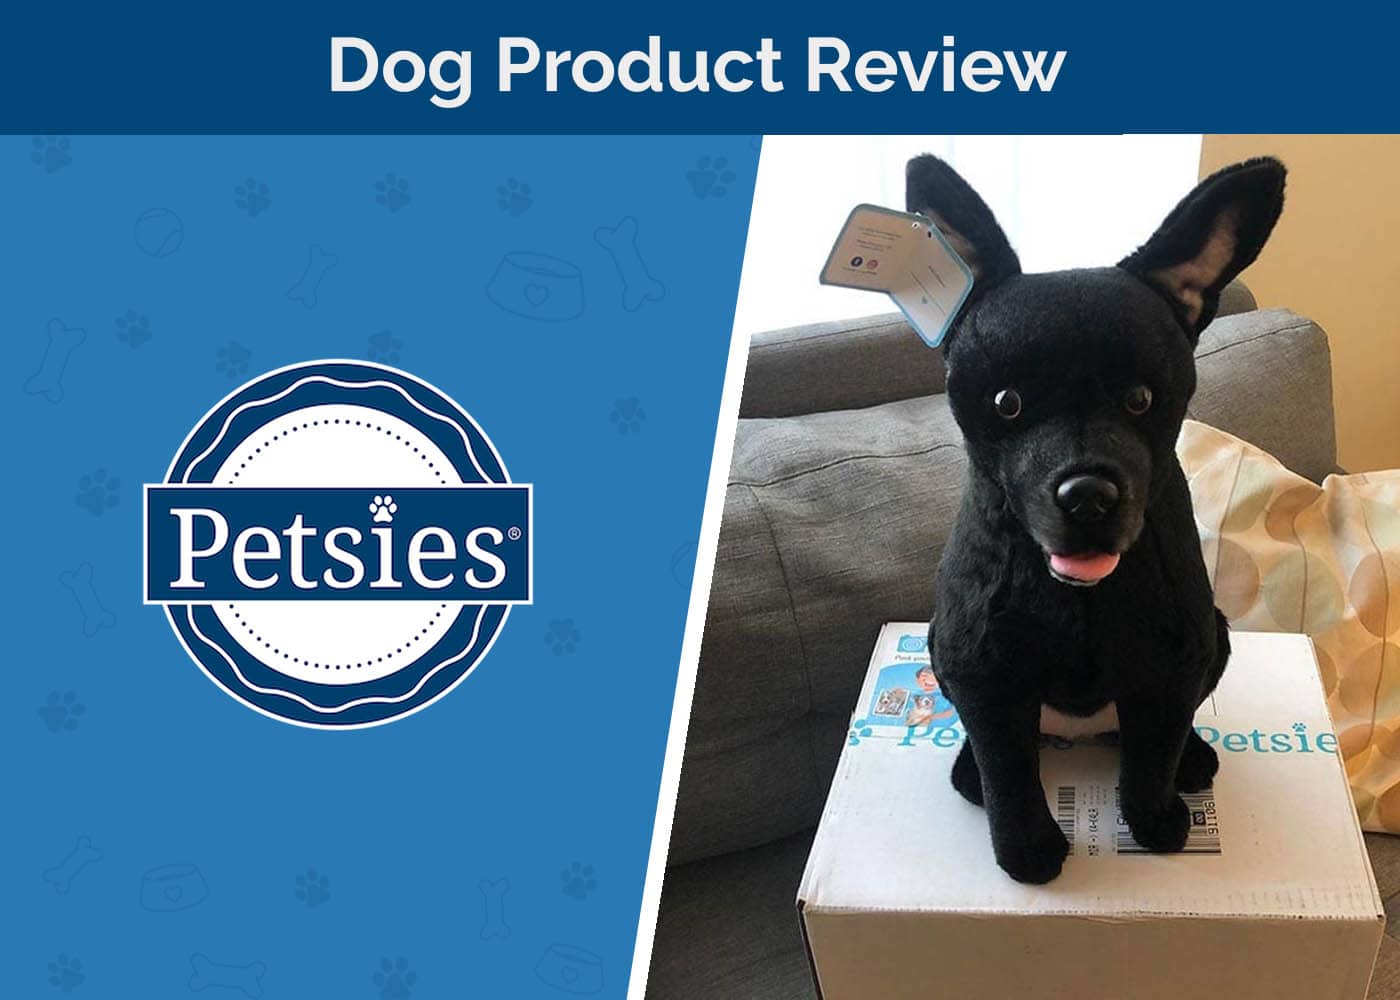 Petsies Product Review